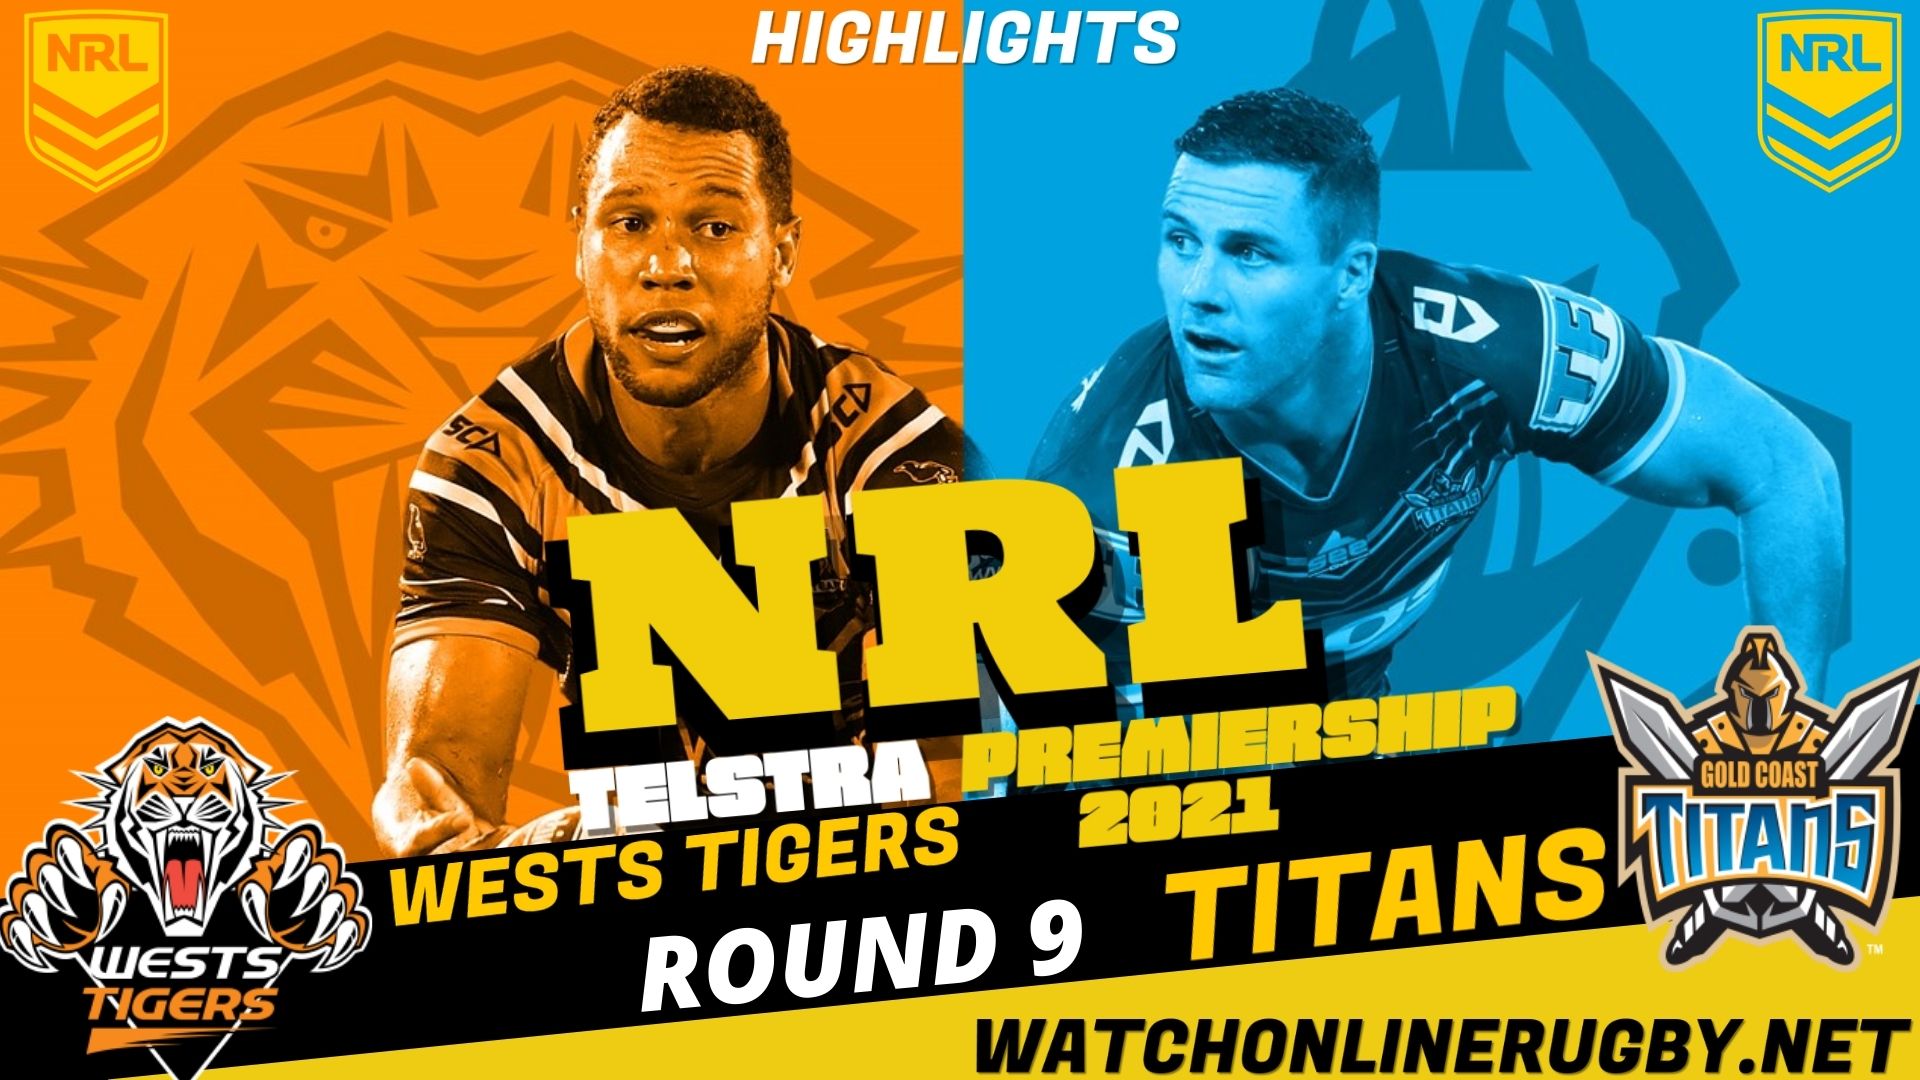 Wests Tigers Vs Titans Highlights RD 9 NRL Rugby